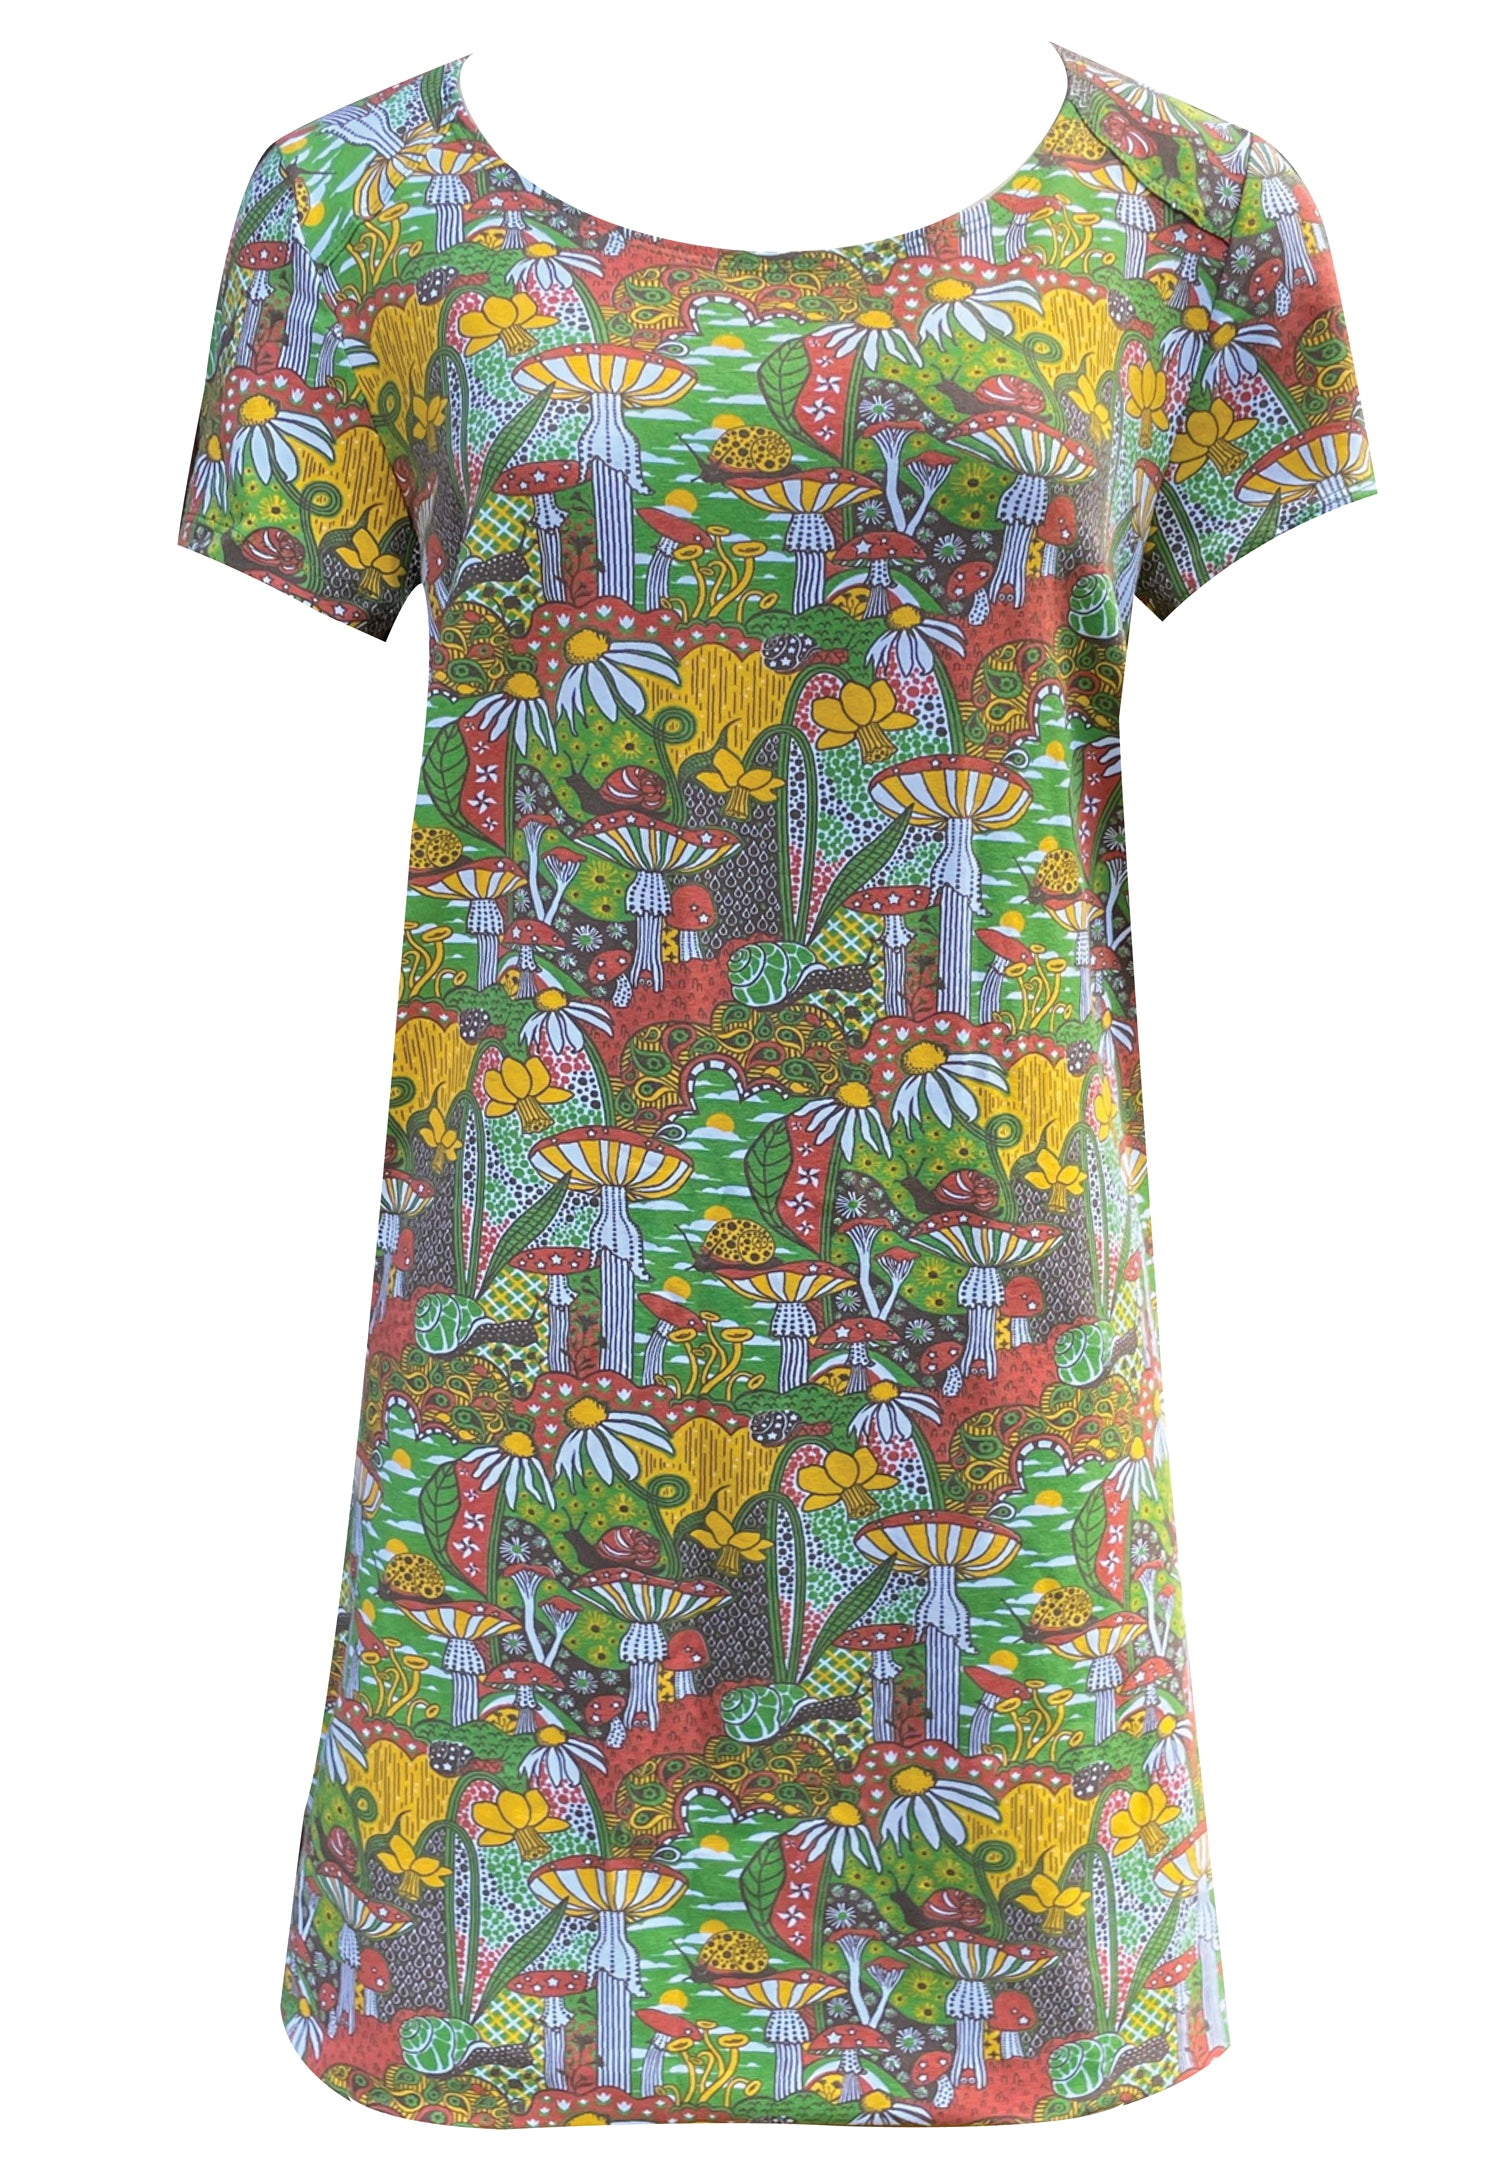 Olive green, orange and yellow mushroom, snail, and flower print cap-sleeved pocket tunic 